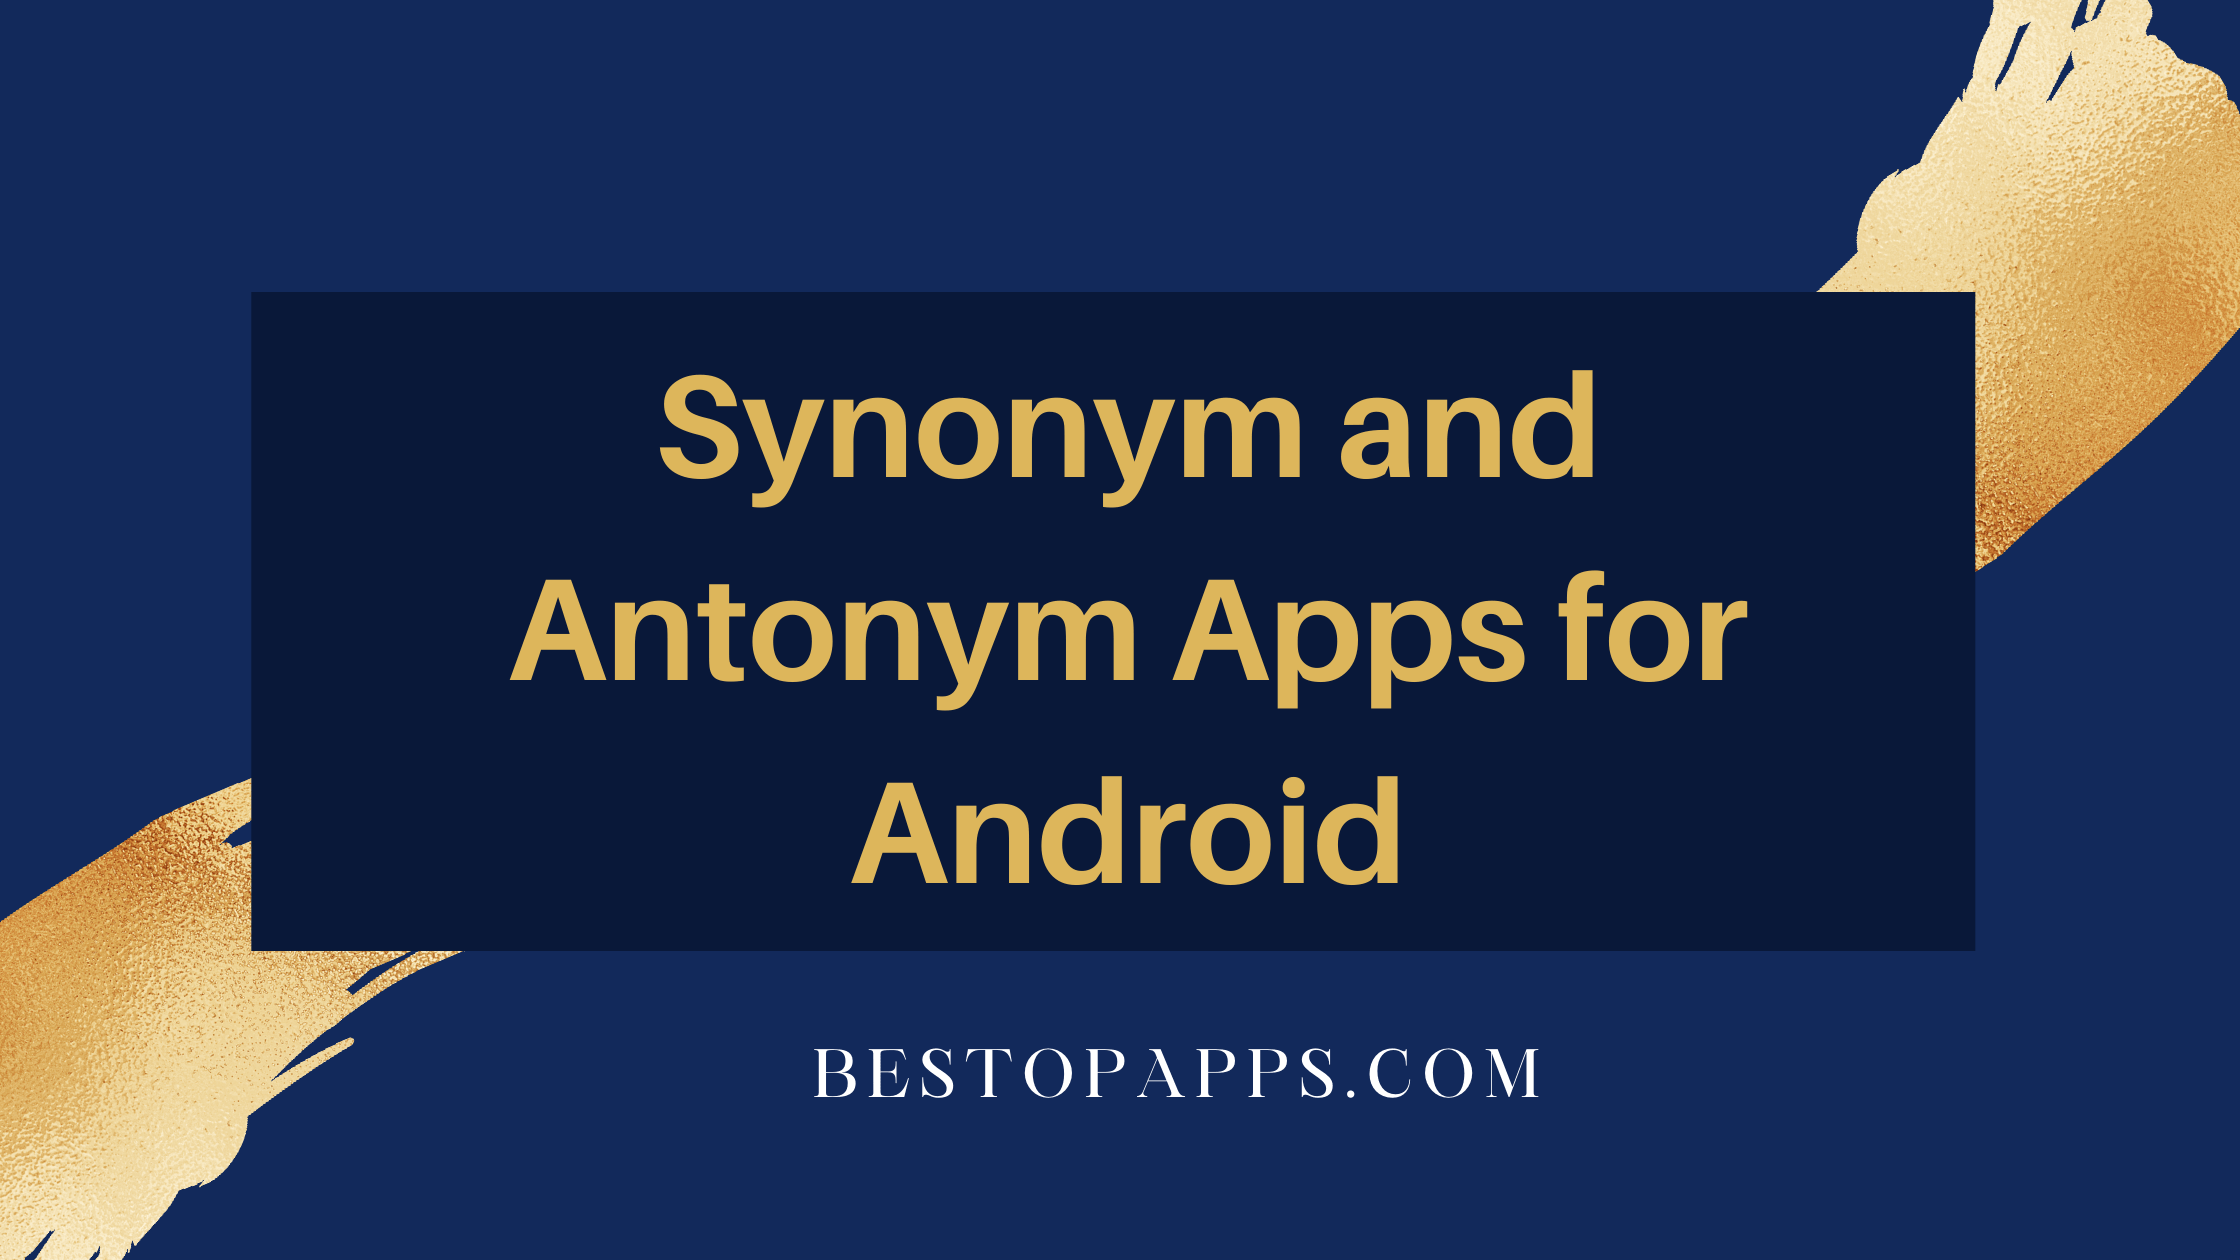 Synonym and Antonym Apps for Android